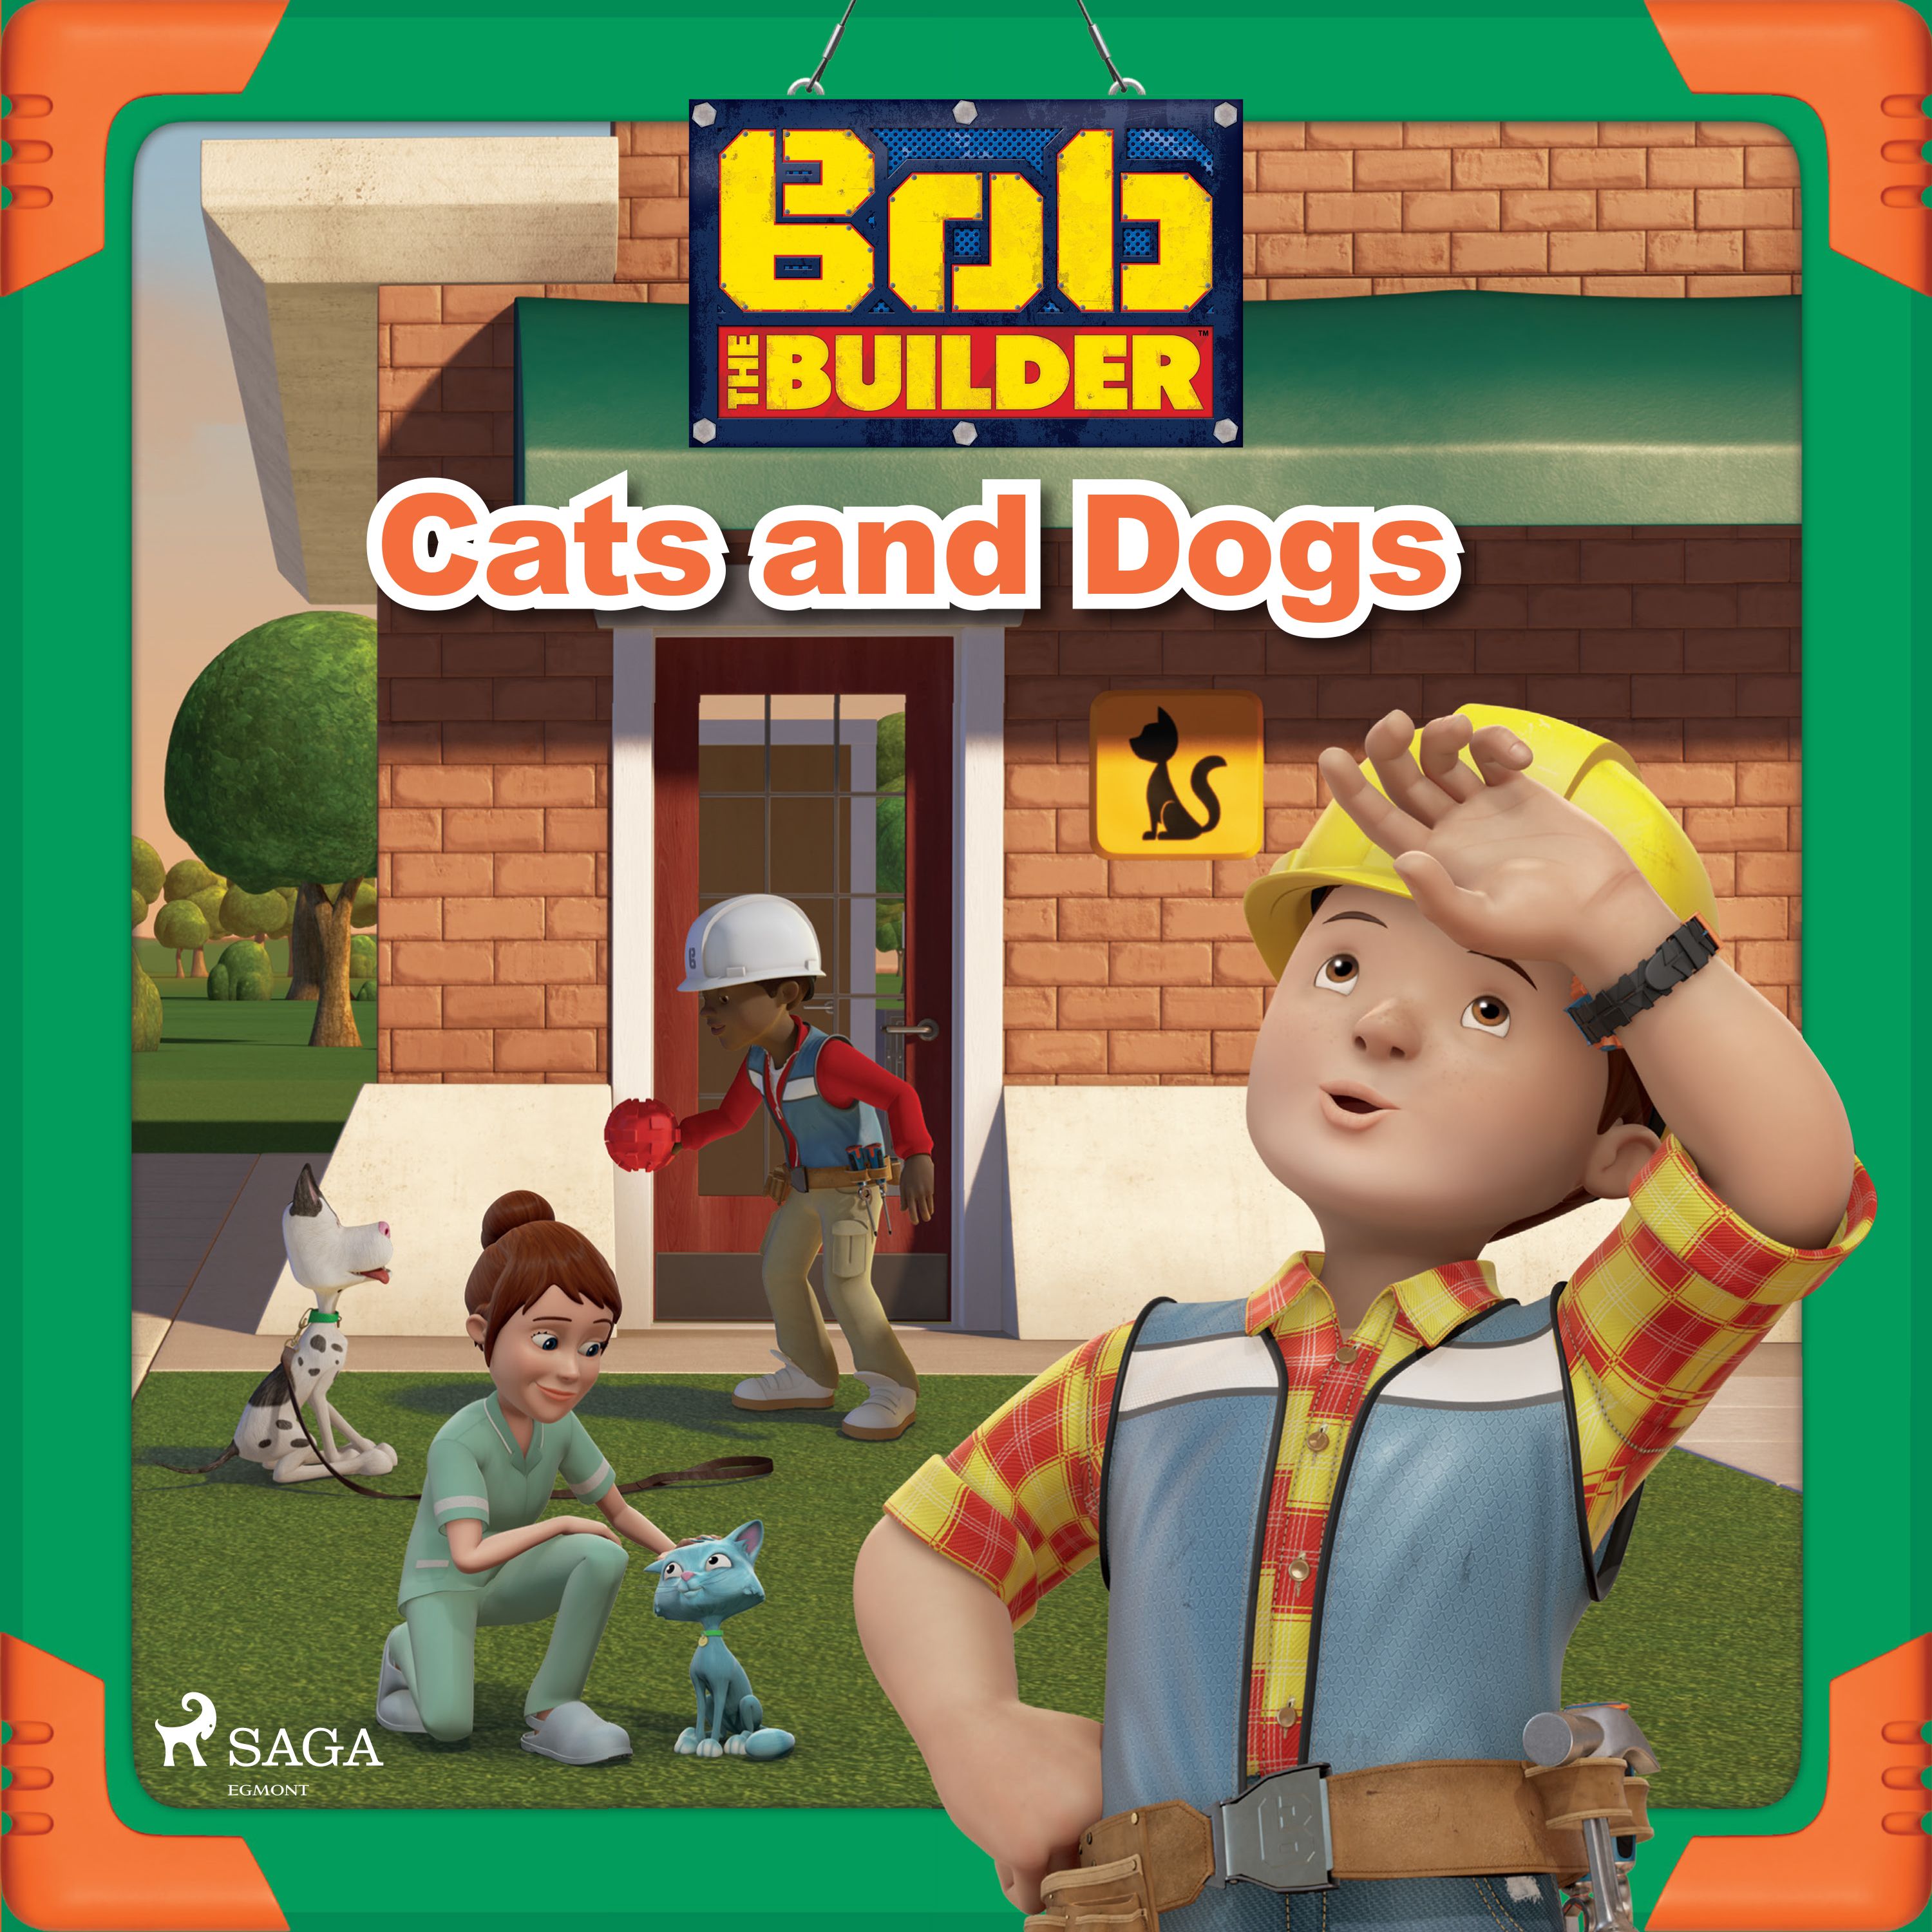 Bob the Builder: Cats and Dogs, audiobook by Mattel